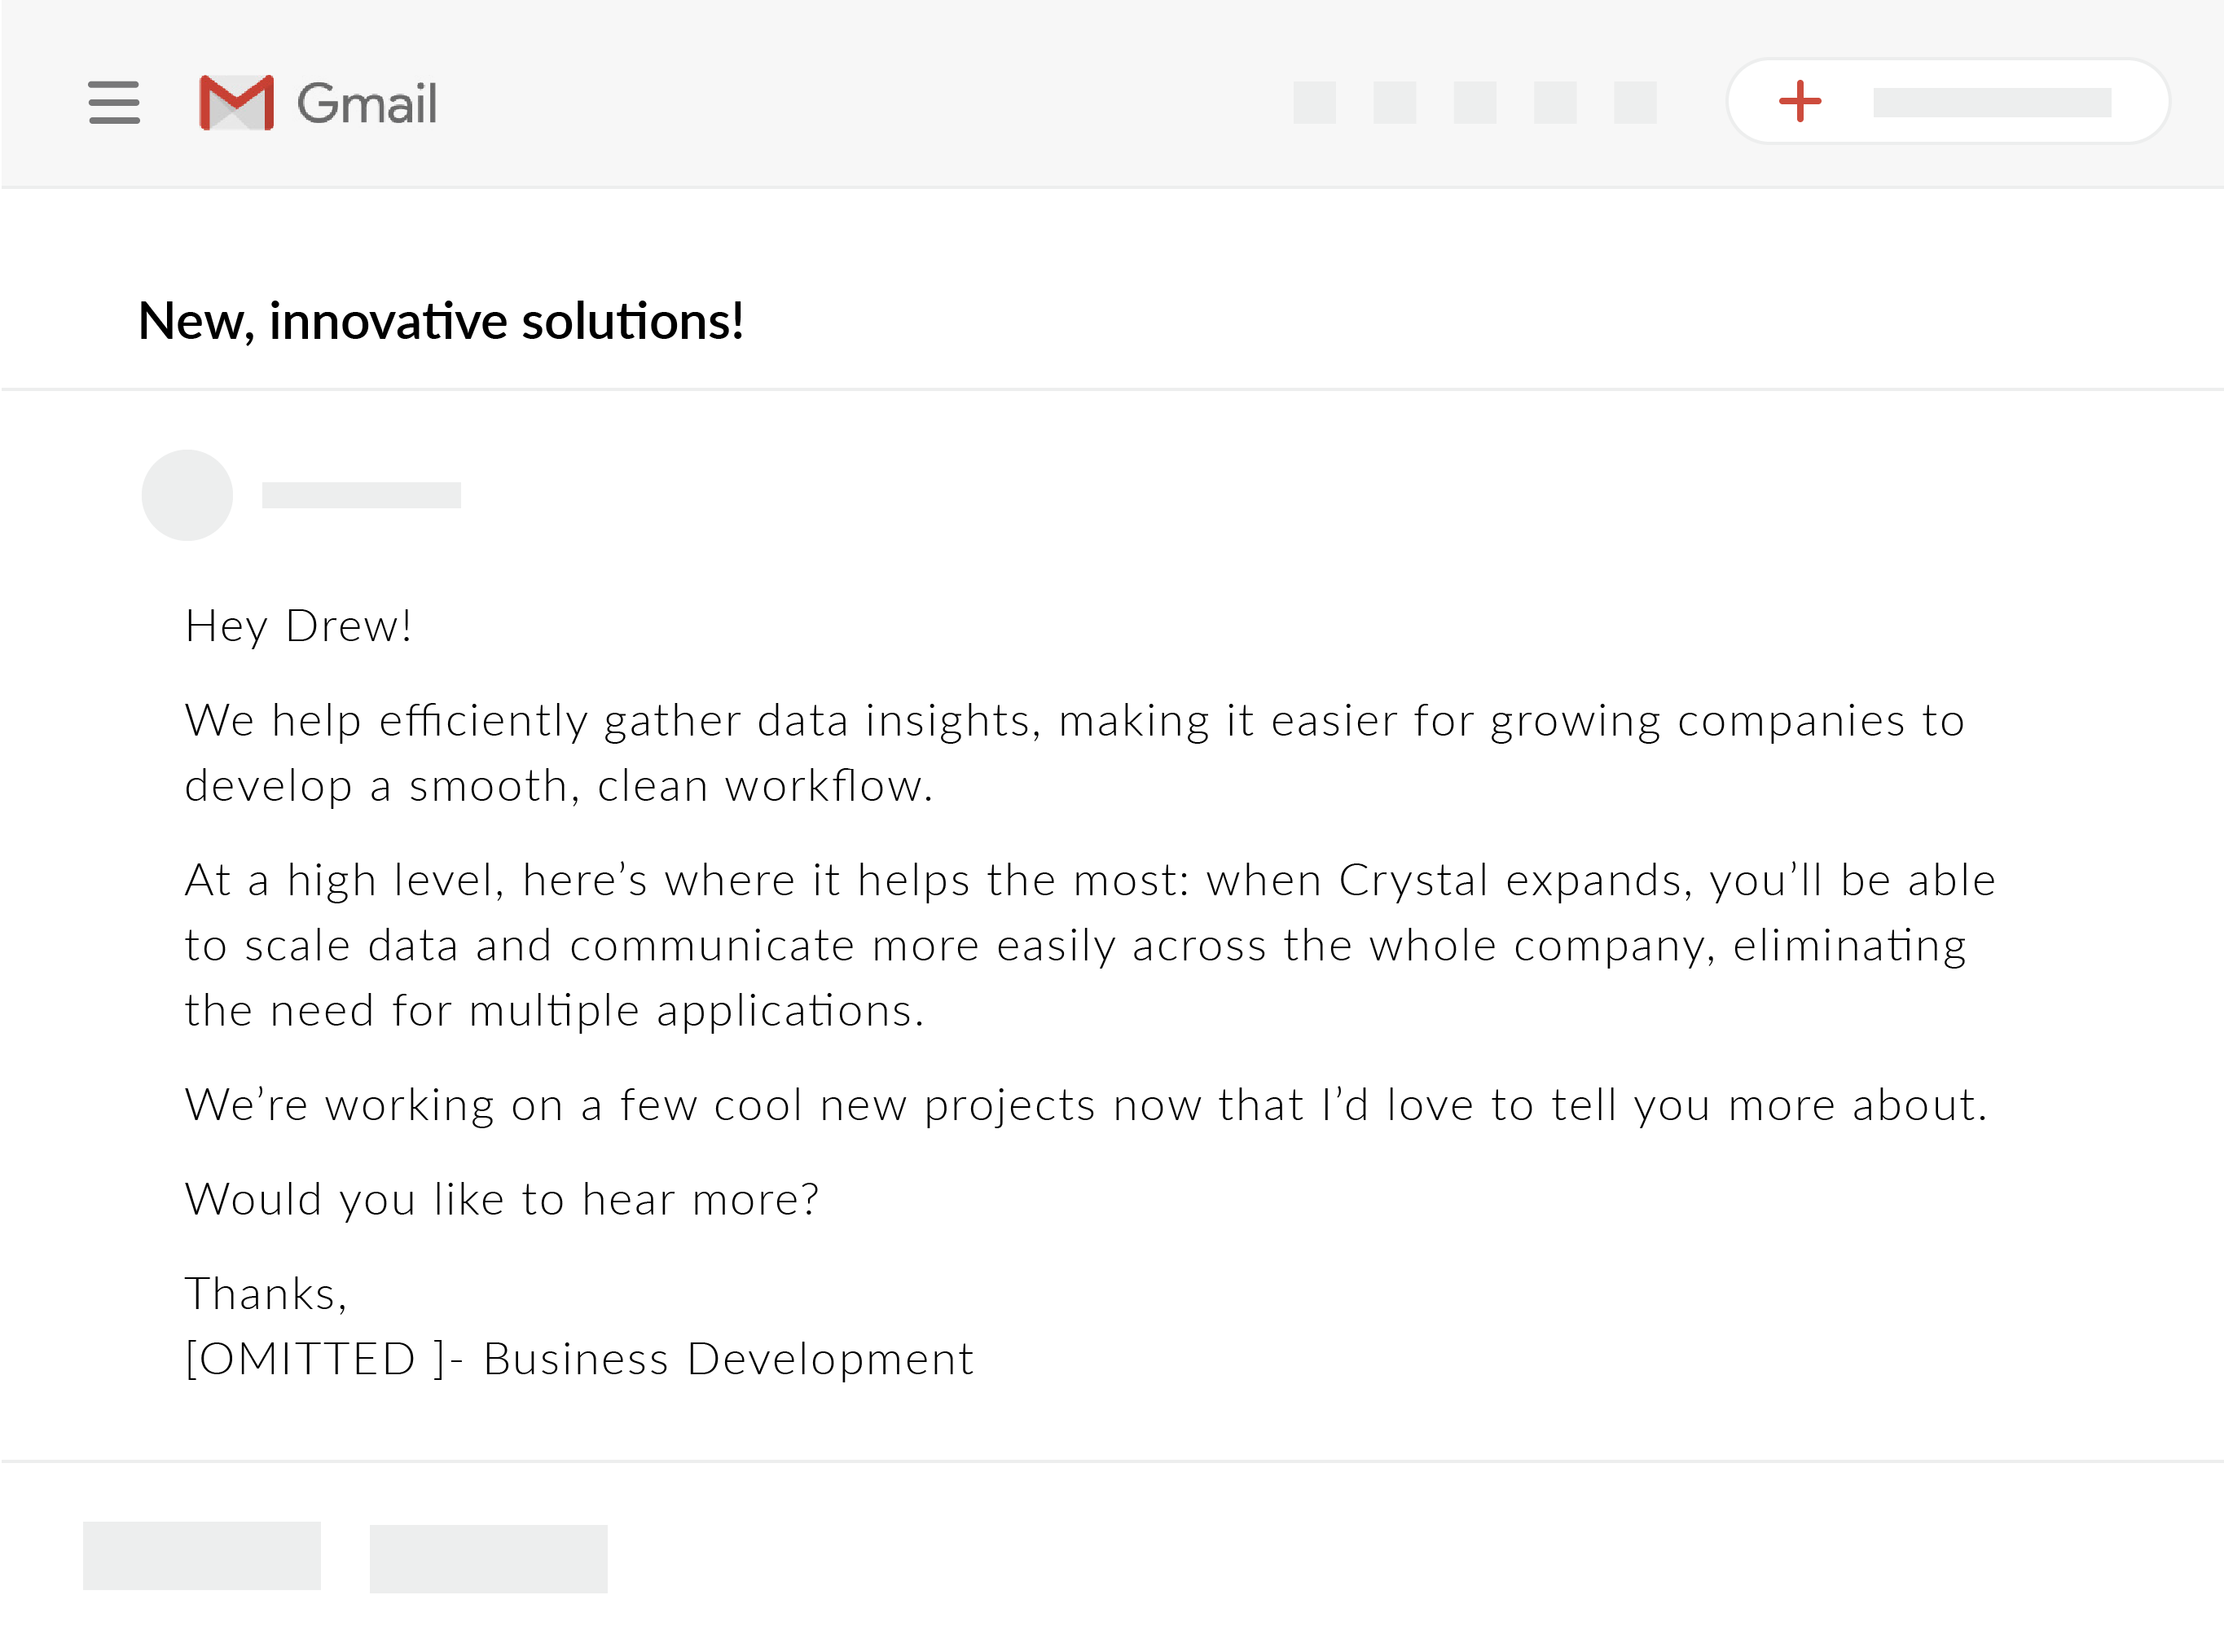 how to improve emails - DISC